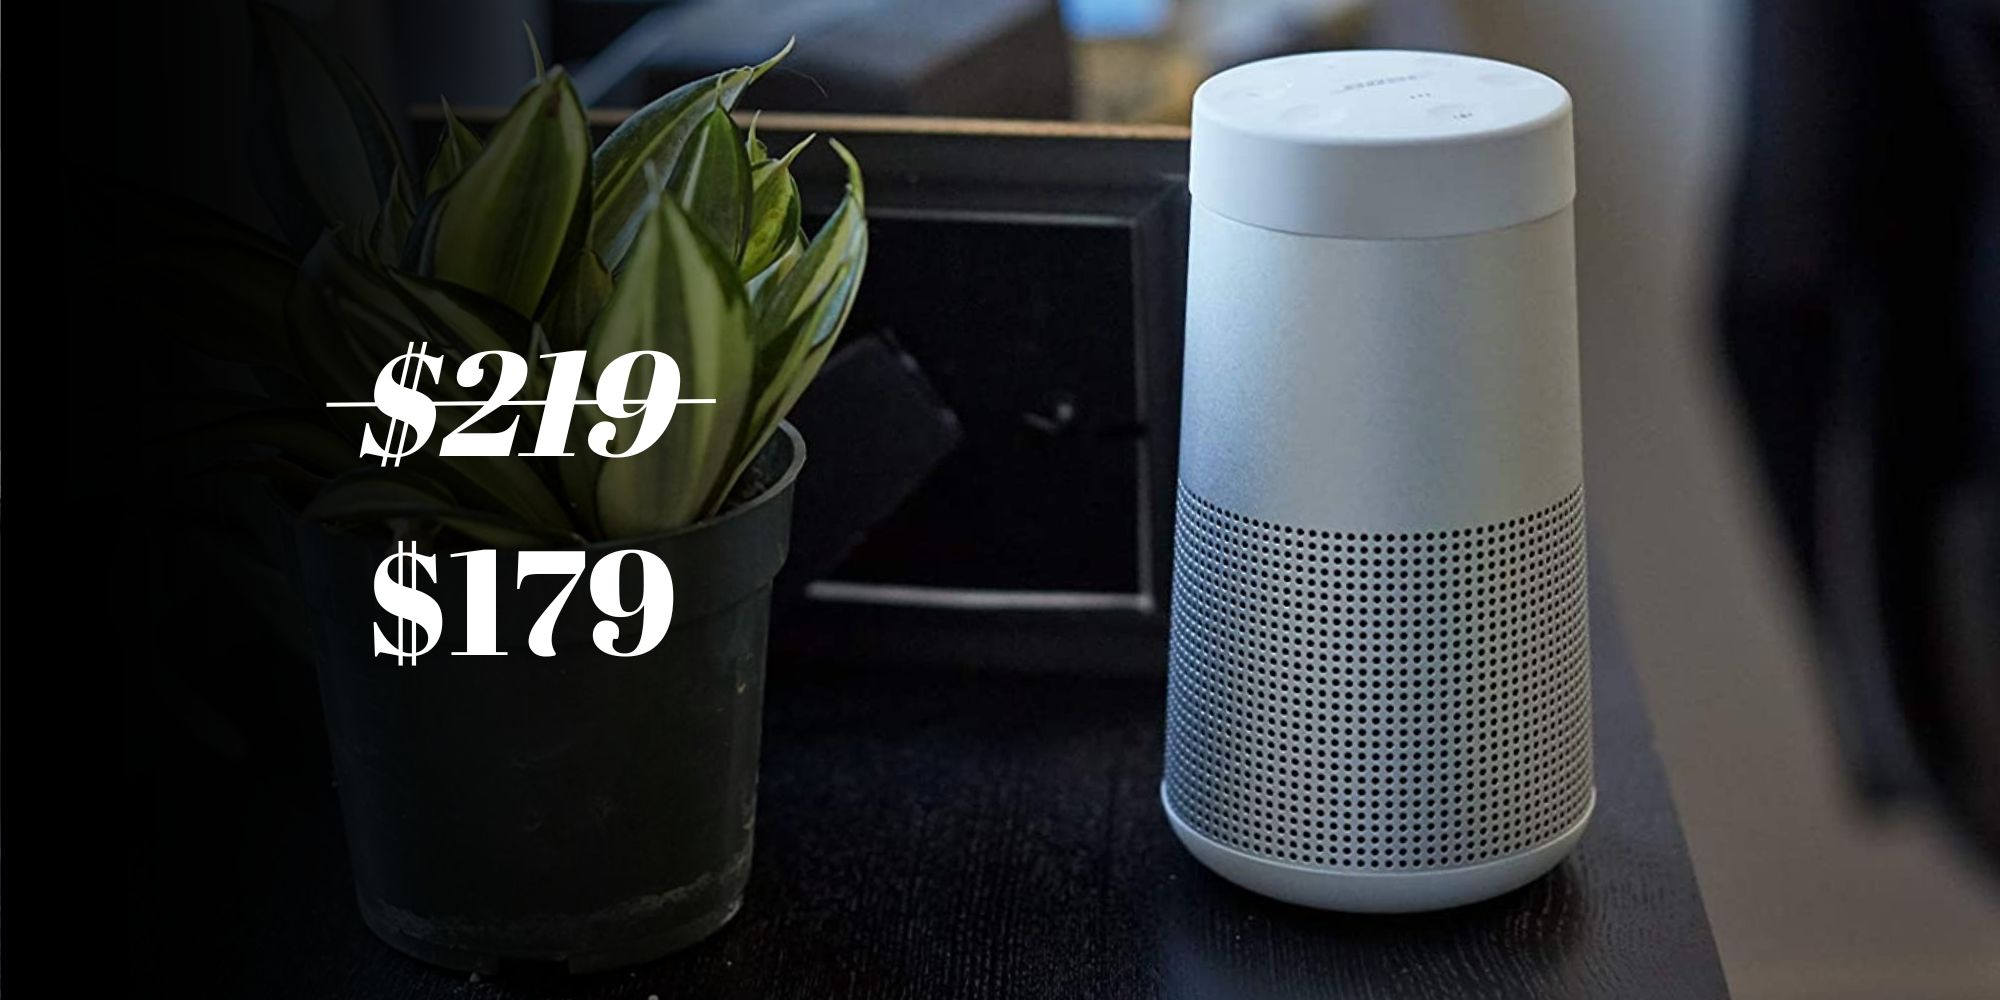 Bose SoundLink Revolve at a discounted price